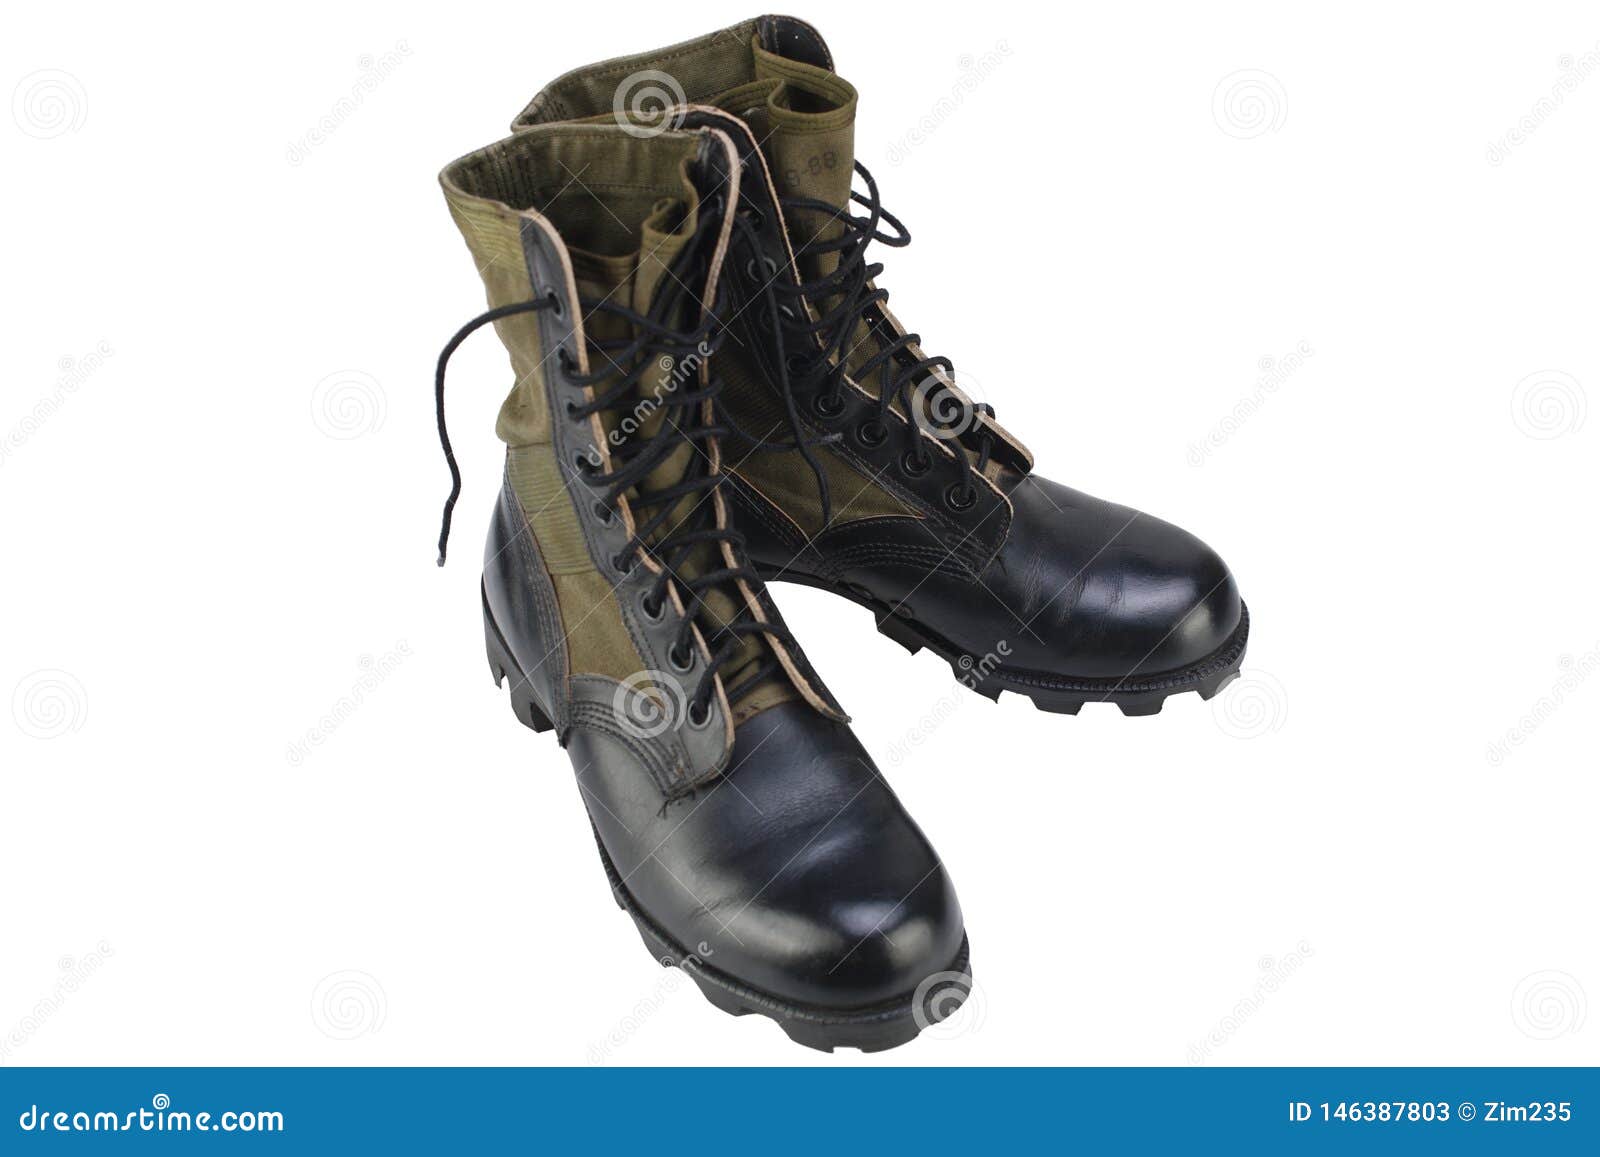 New Brand US Army Pattern Jungle Boots Isolated Stock Image - Image of ...